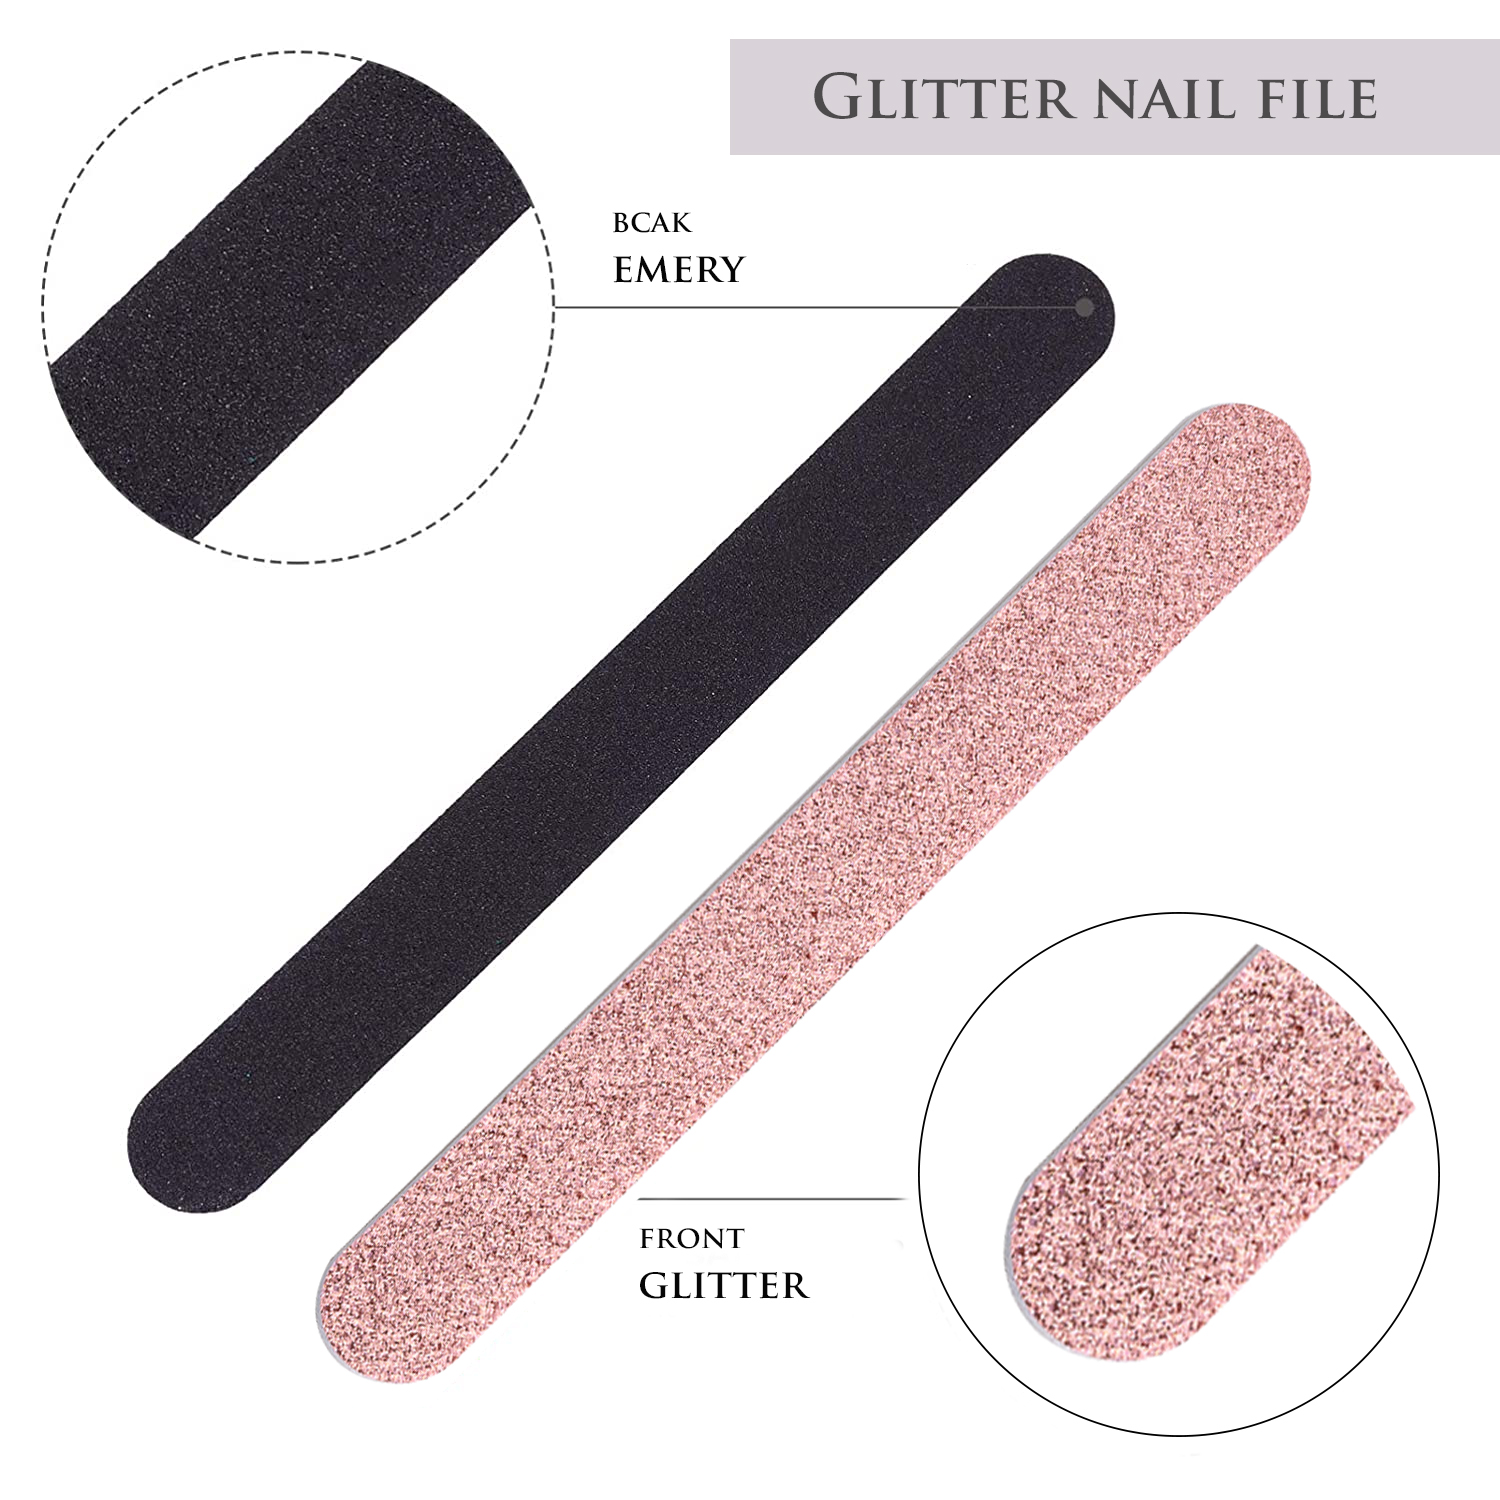 Glitter Nail File Colorful Nail Boards Nail Buffer Double Sided Emery Boards Fingernails Toenails Manicure Files Manicure Care Pedicure Tools for Women Girls